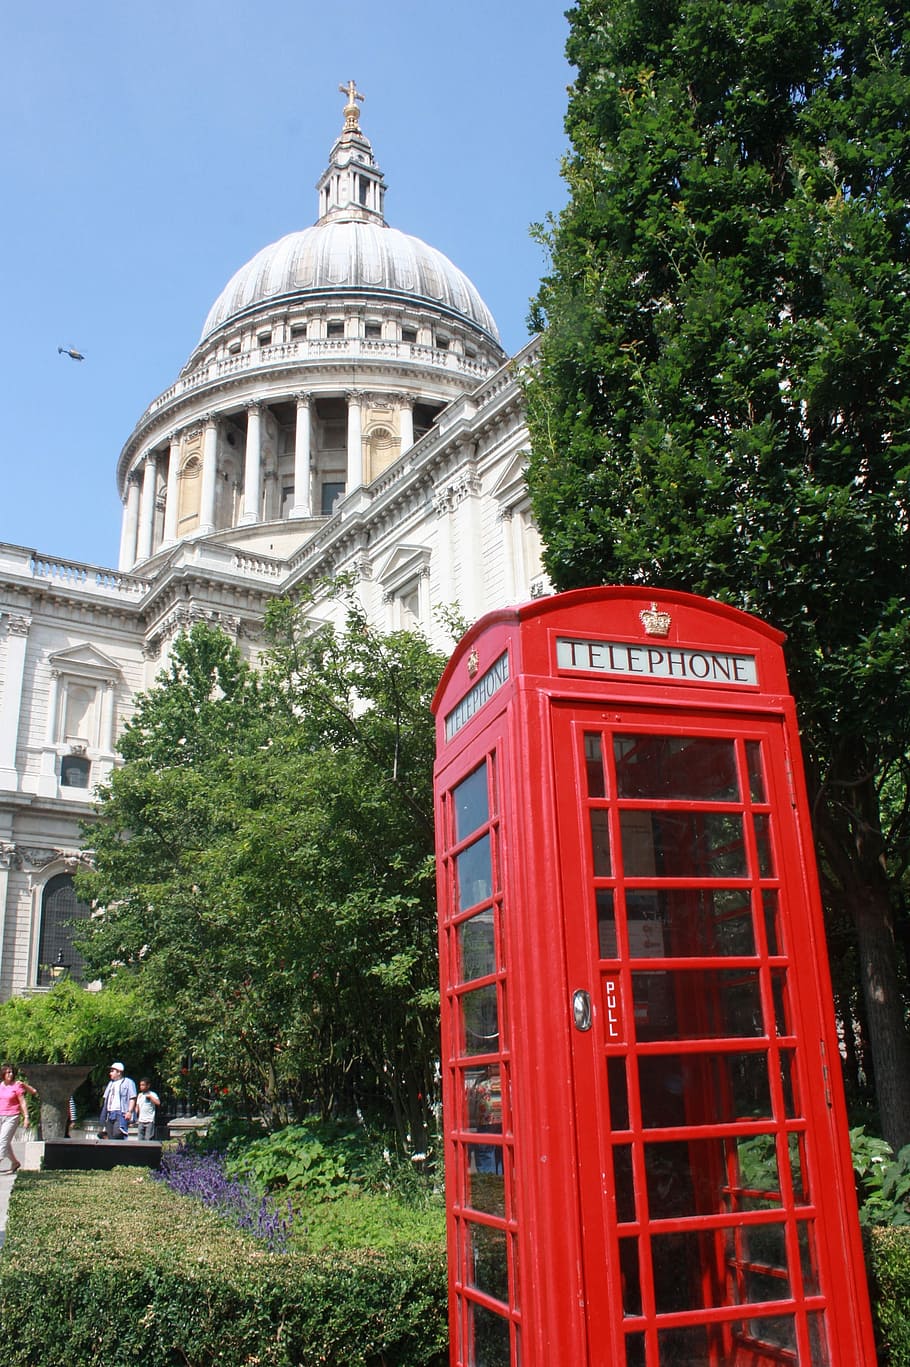 London, Telephone Booth, Cathedral, red, england, architecture, communication, tree, dome, built structure